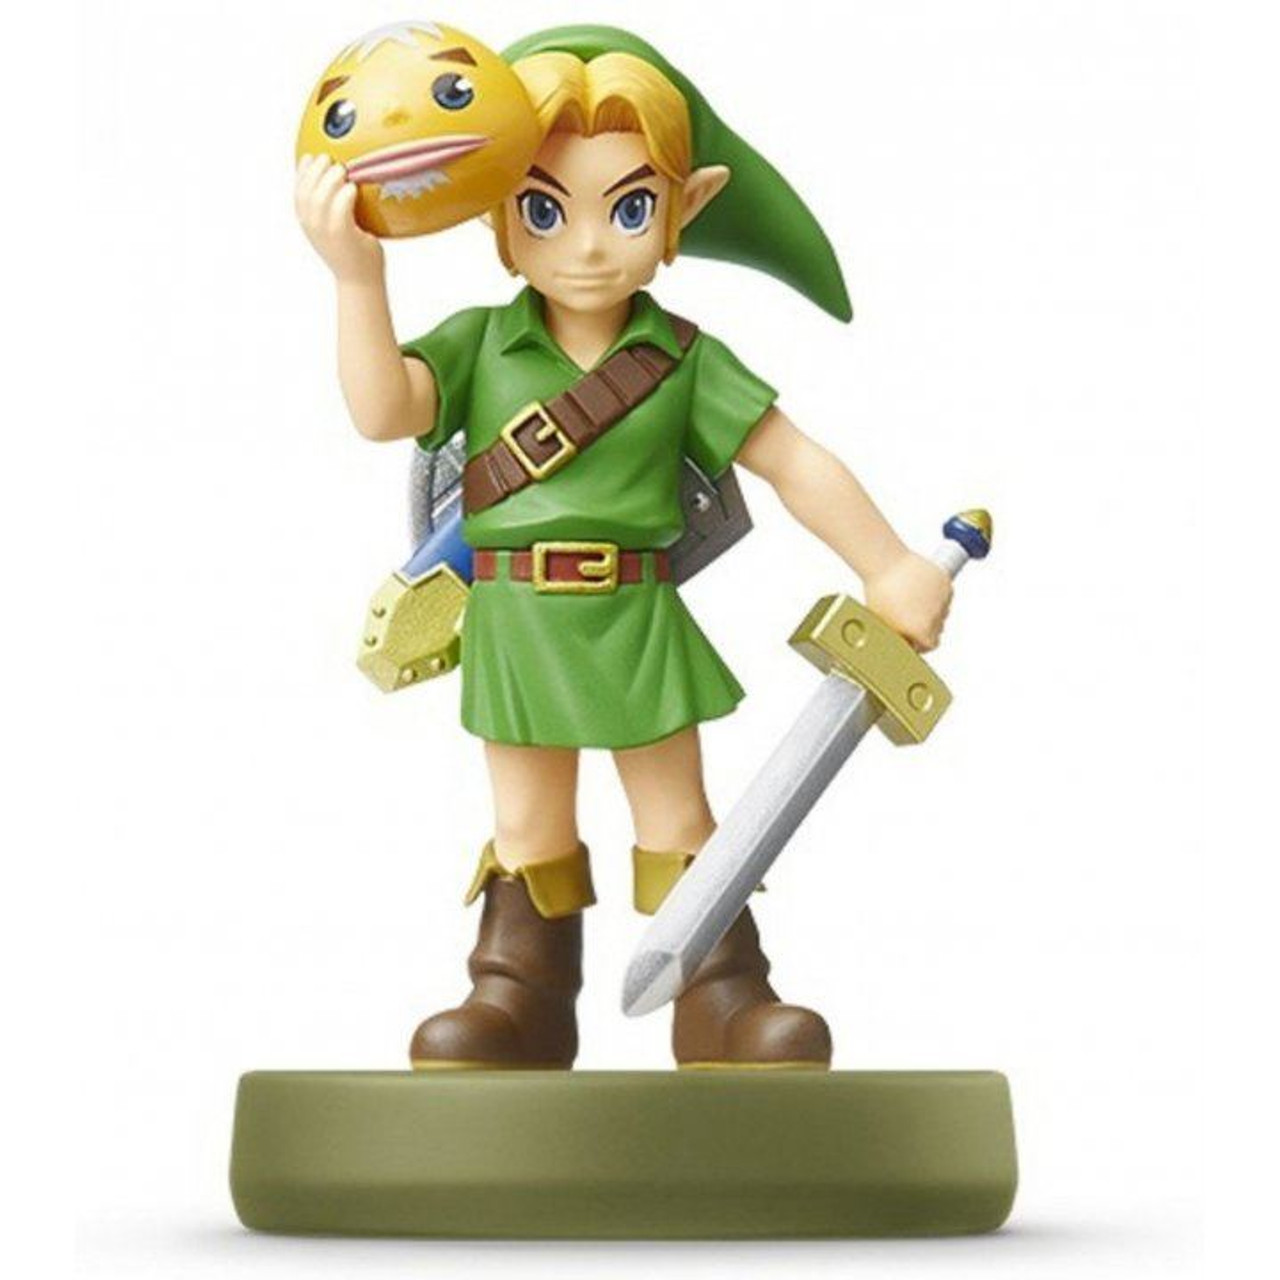 Link Mask Amiibo The Legend of Zelda Series Figure EU Version available at VGNY